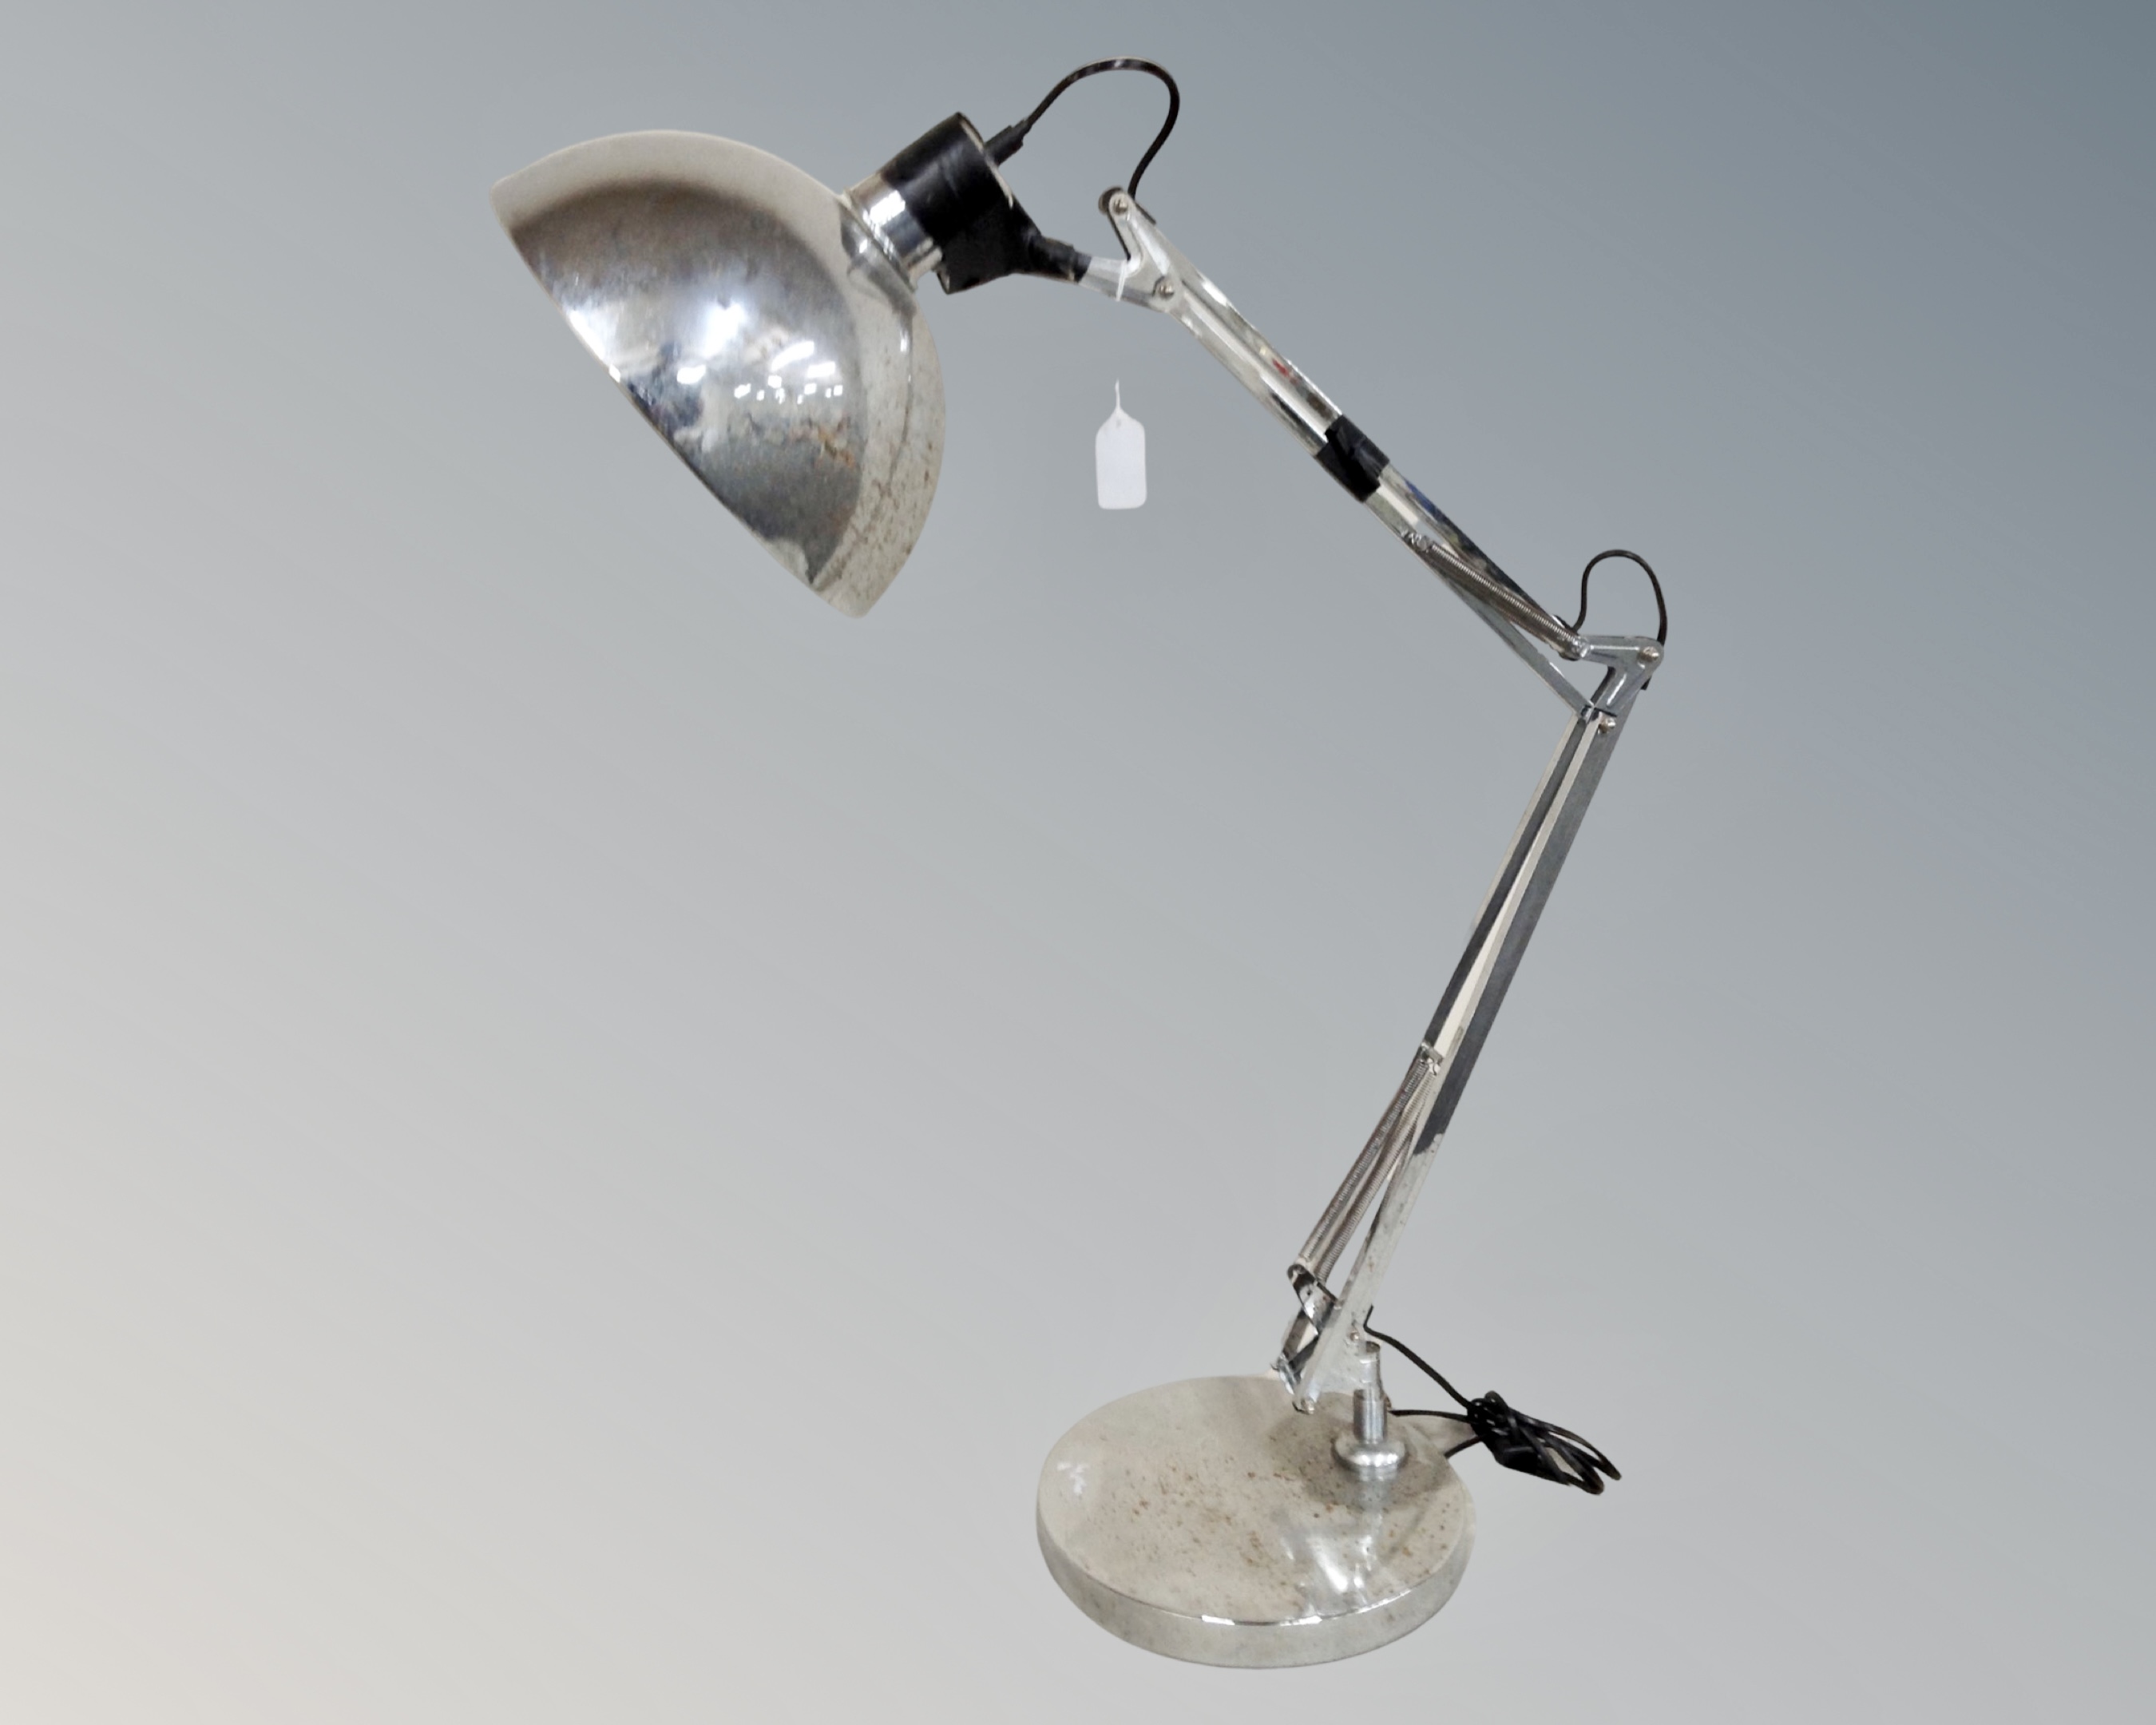 An oversized angle-poise lamp in a chrome finish